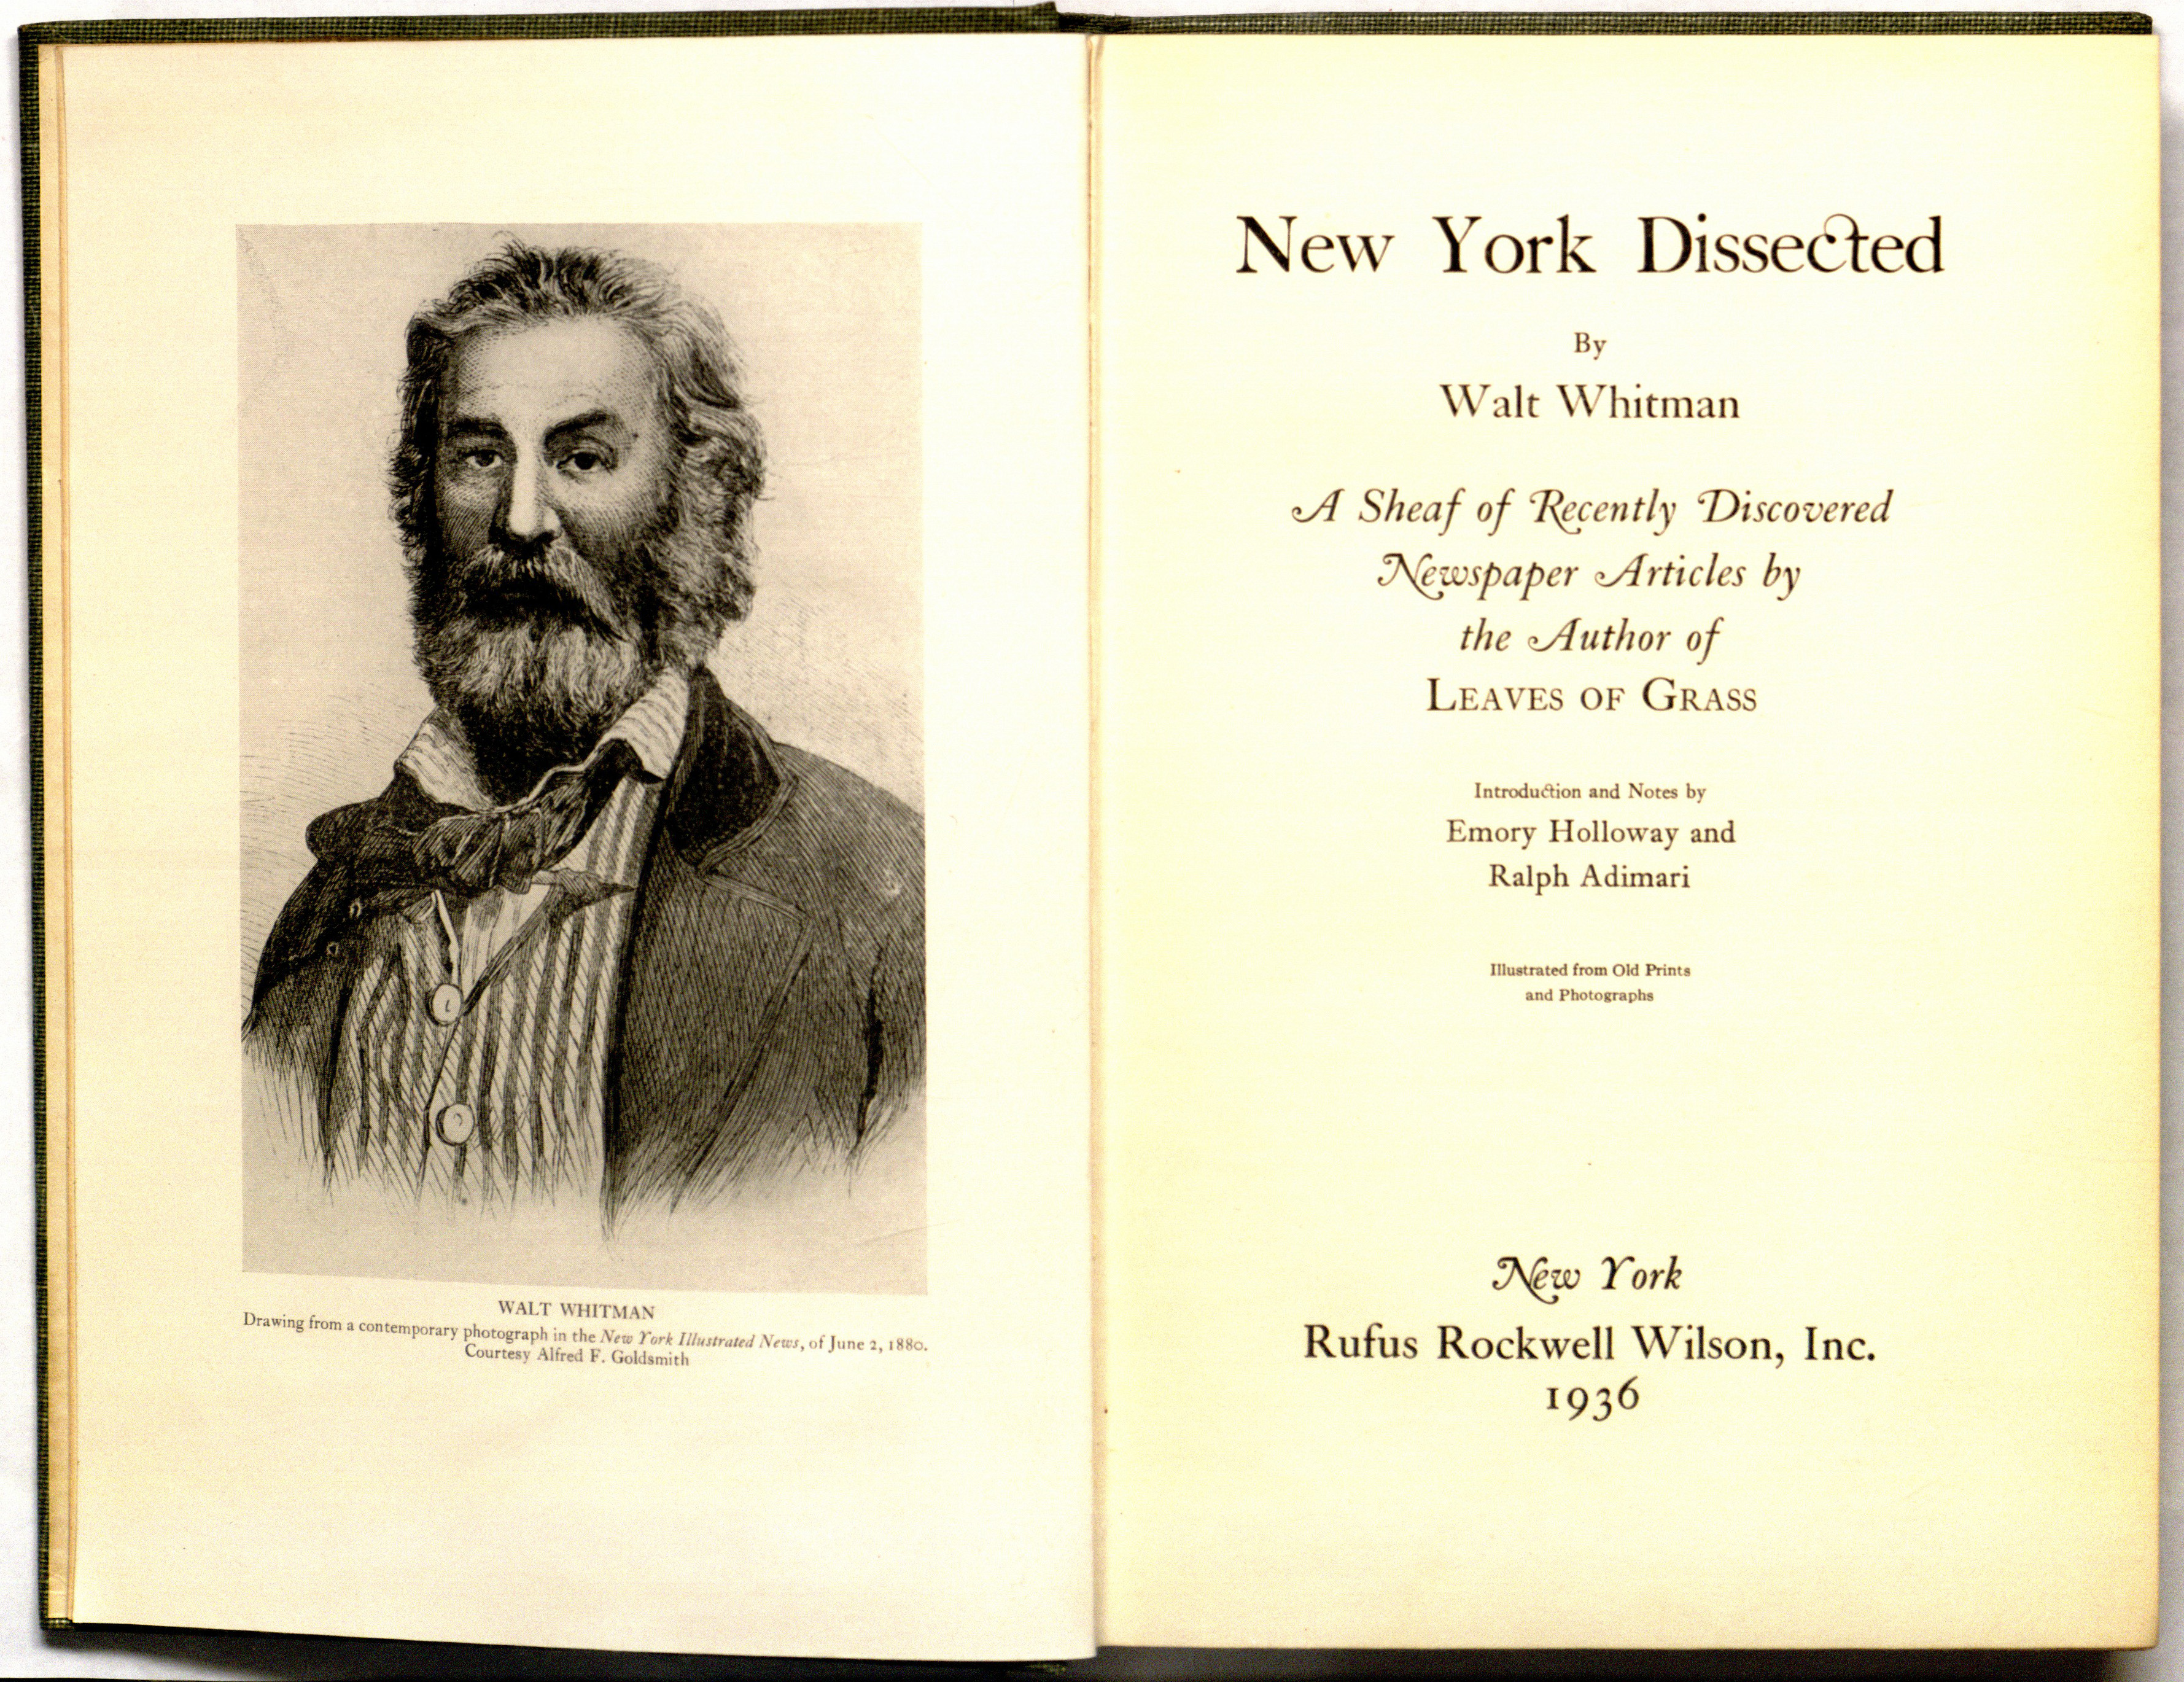 New York Dissected, title page